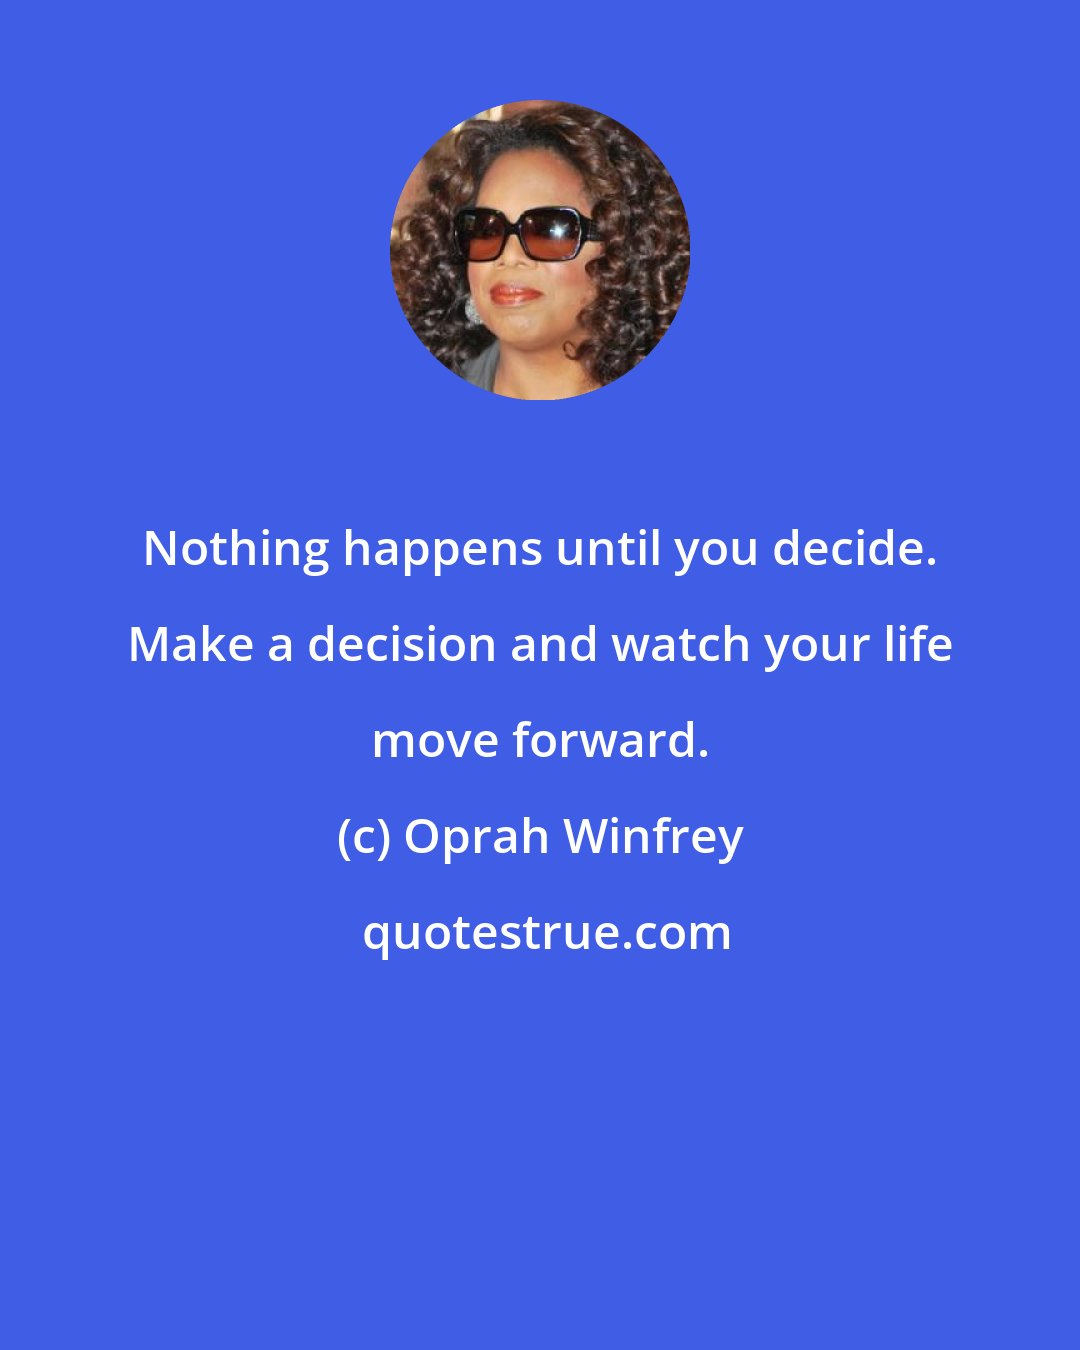 Oprah Winfrey: Nothing happens until you decide. Make a decision and watch your life move forward.